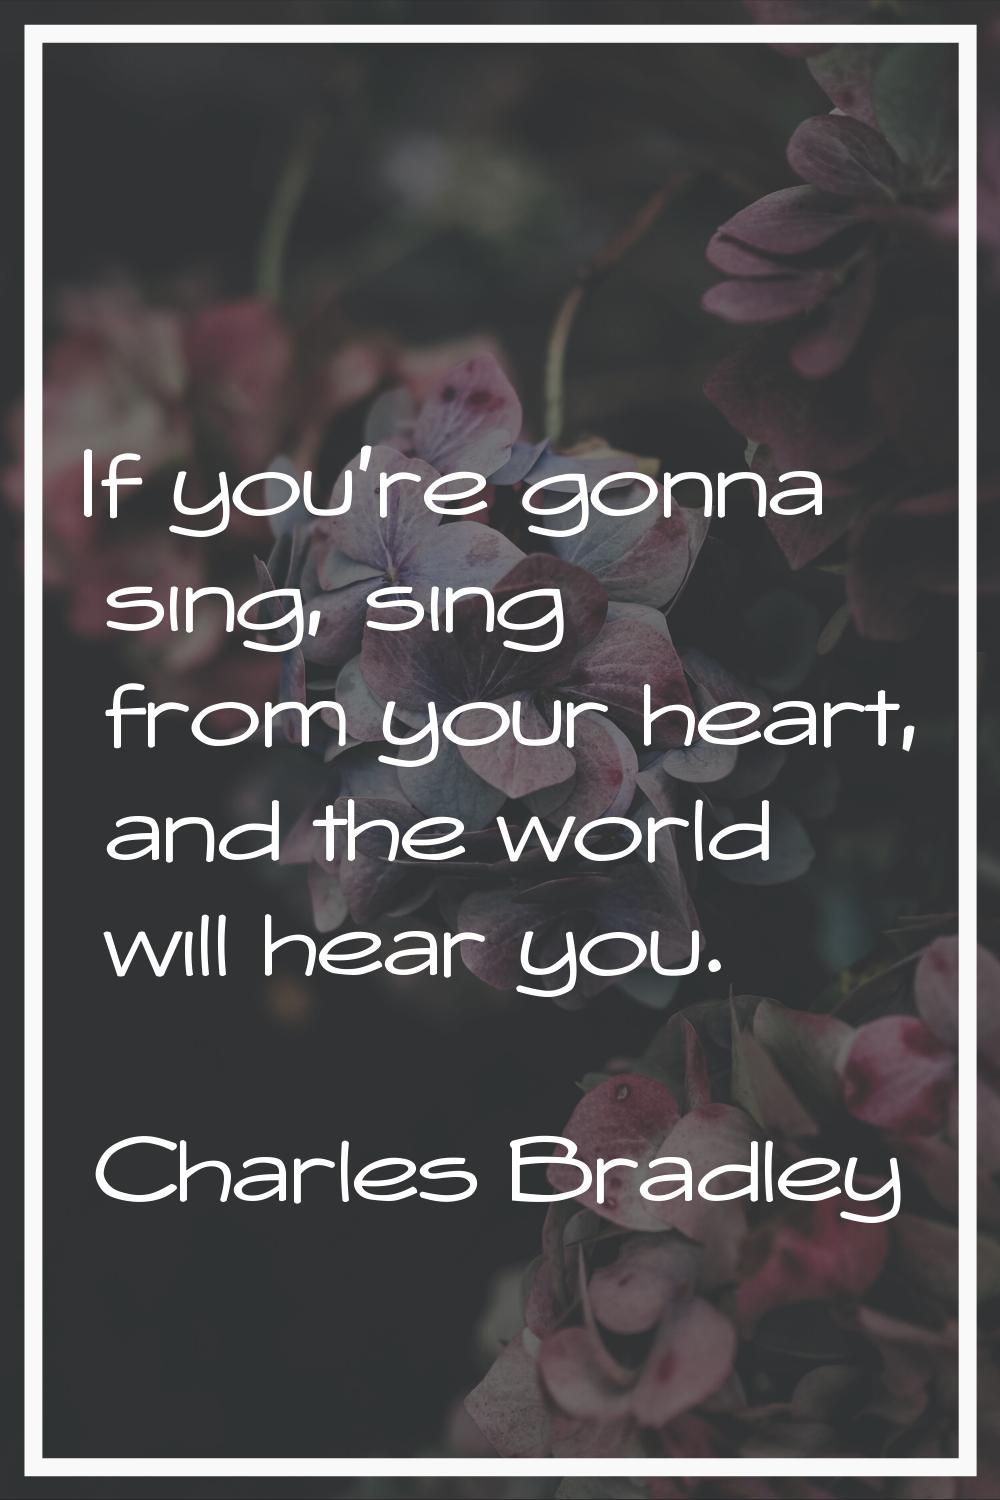 If you're gonna sing, sing from your heart, and the world will hear you.